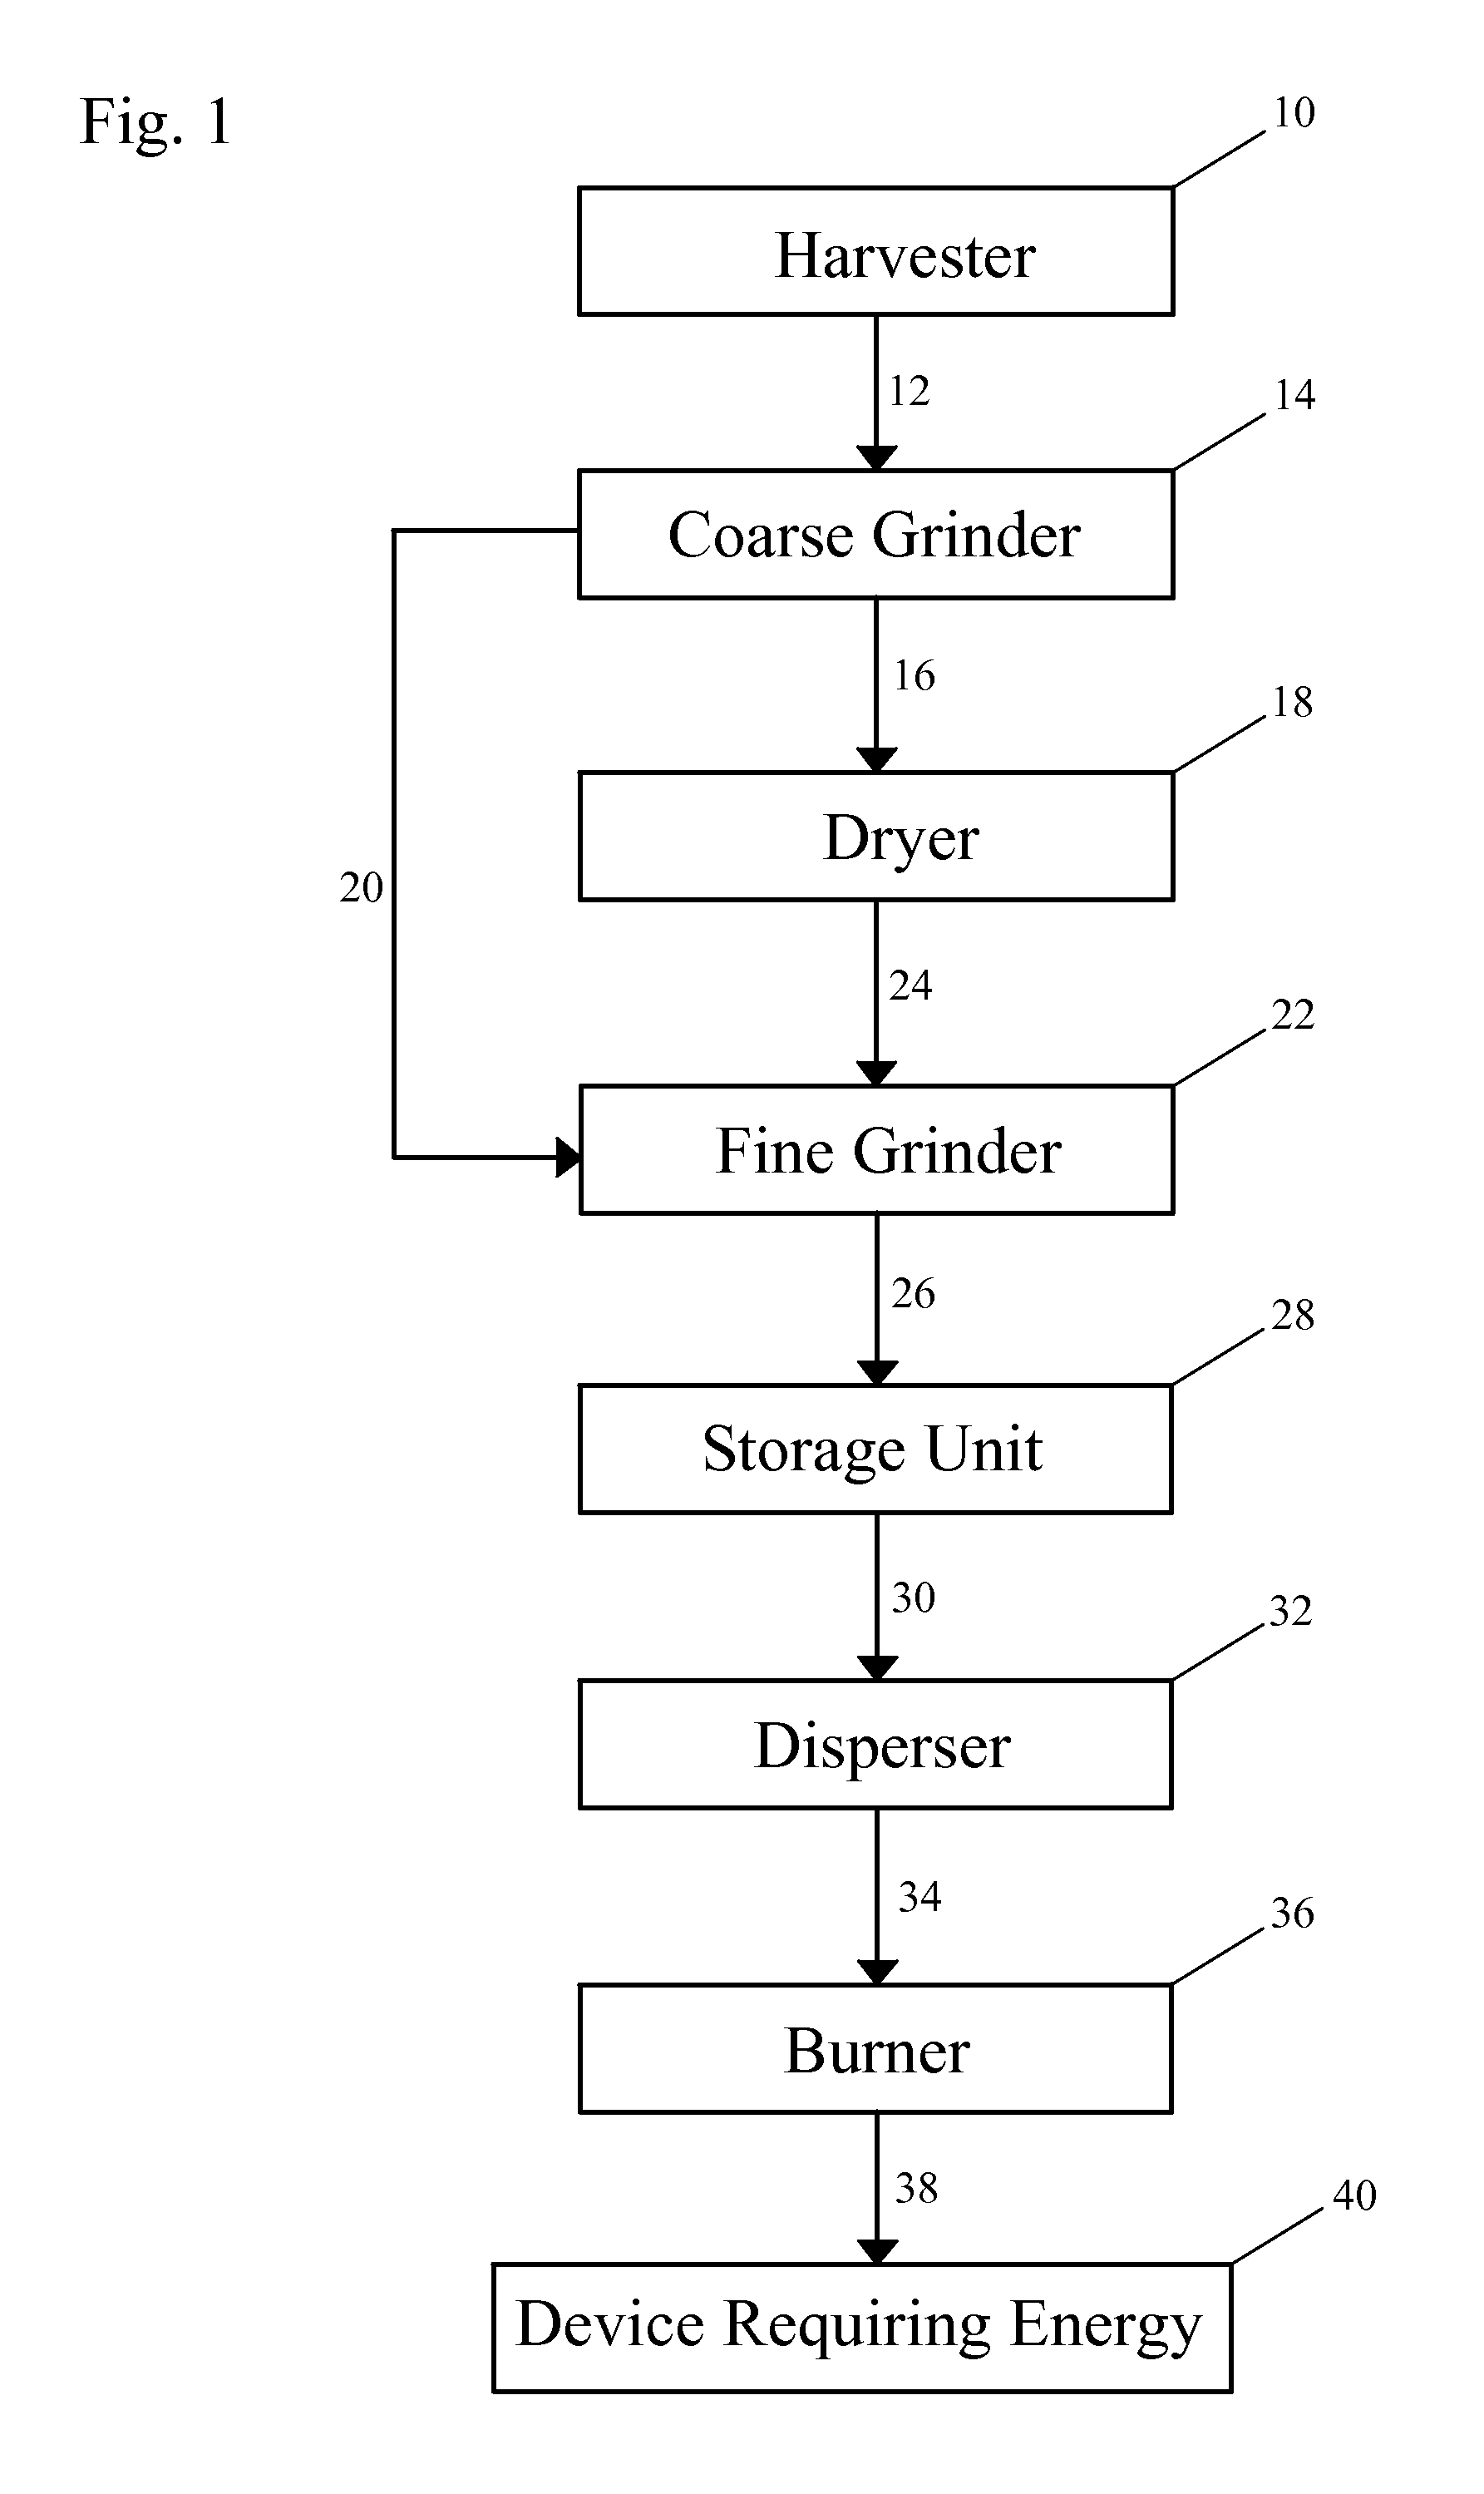 Systems And Methods For Converting Biomass In The Field To A Combustible Fluid For Direct Replacement Or Supplement To Liquid Fossil Fuels